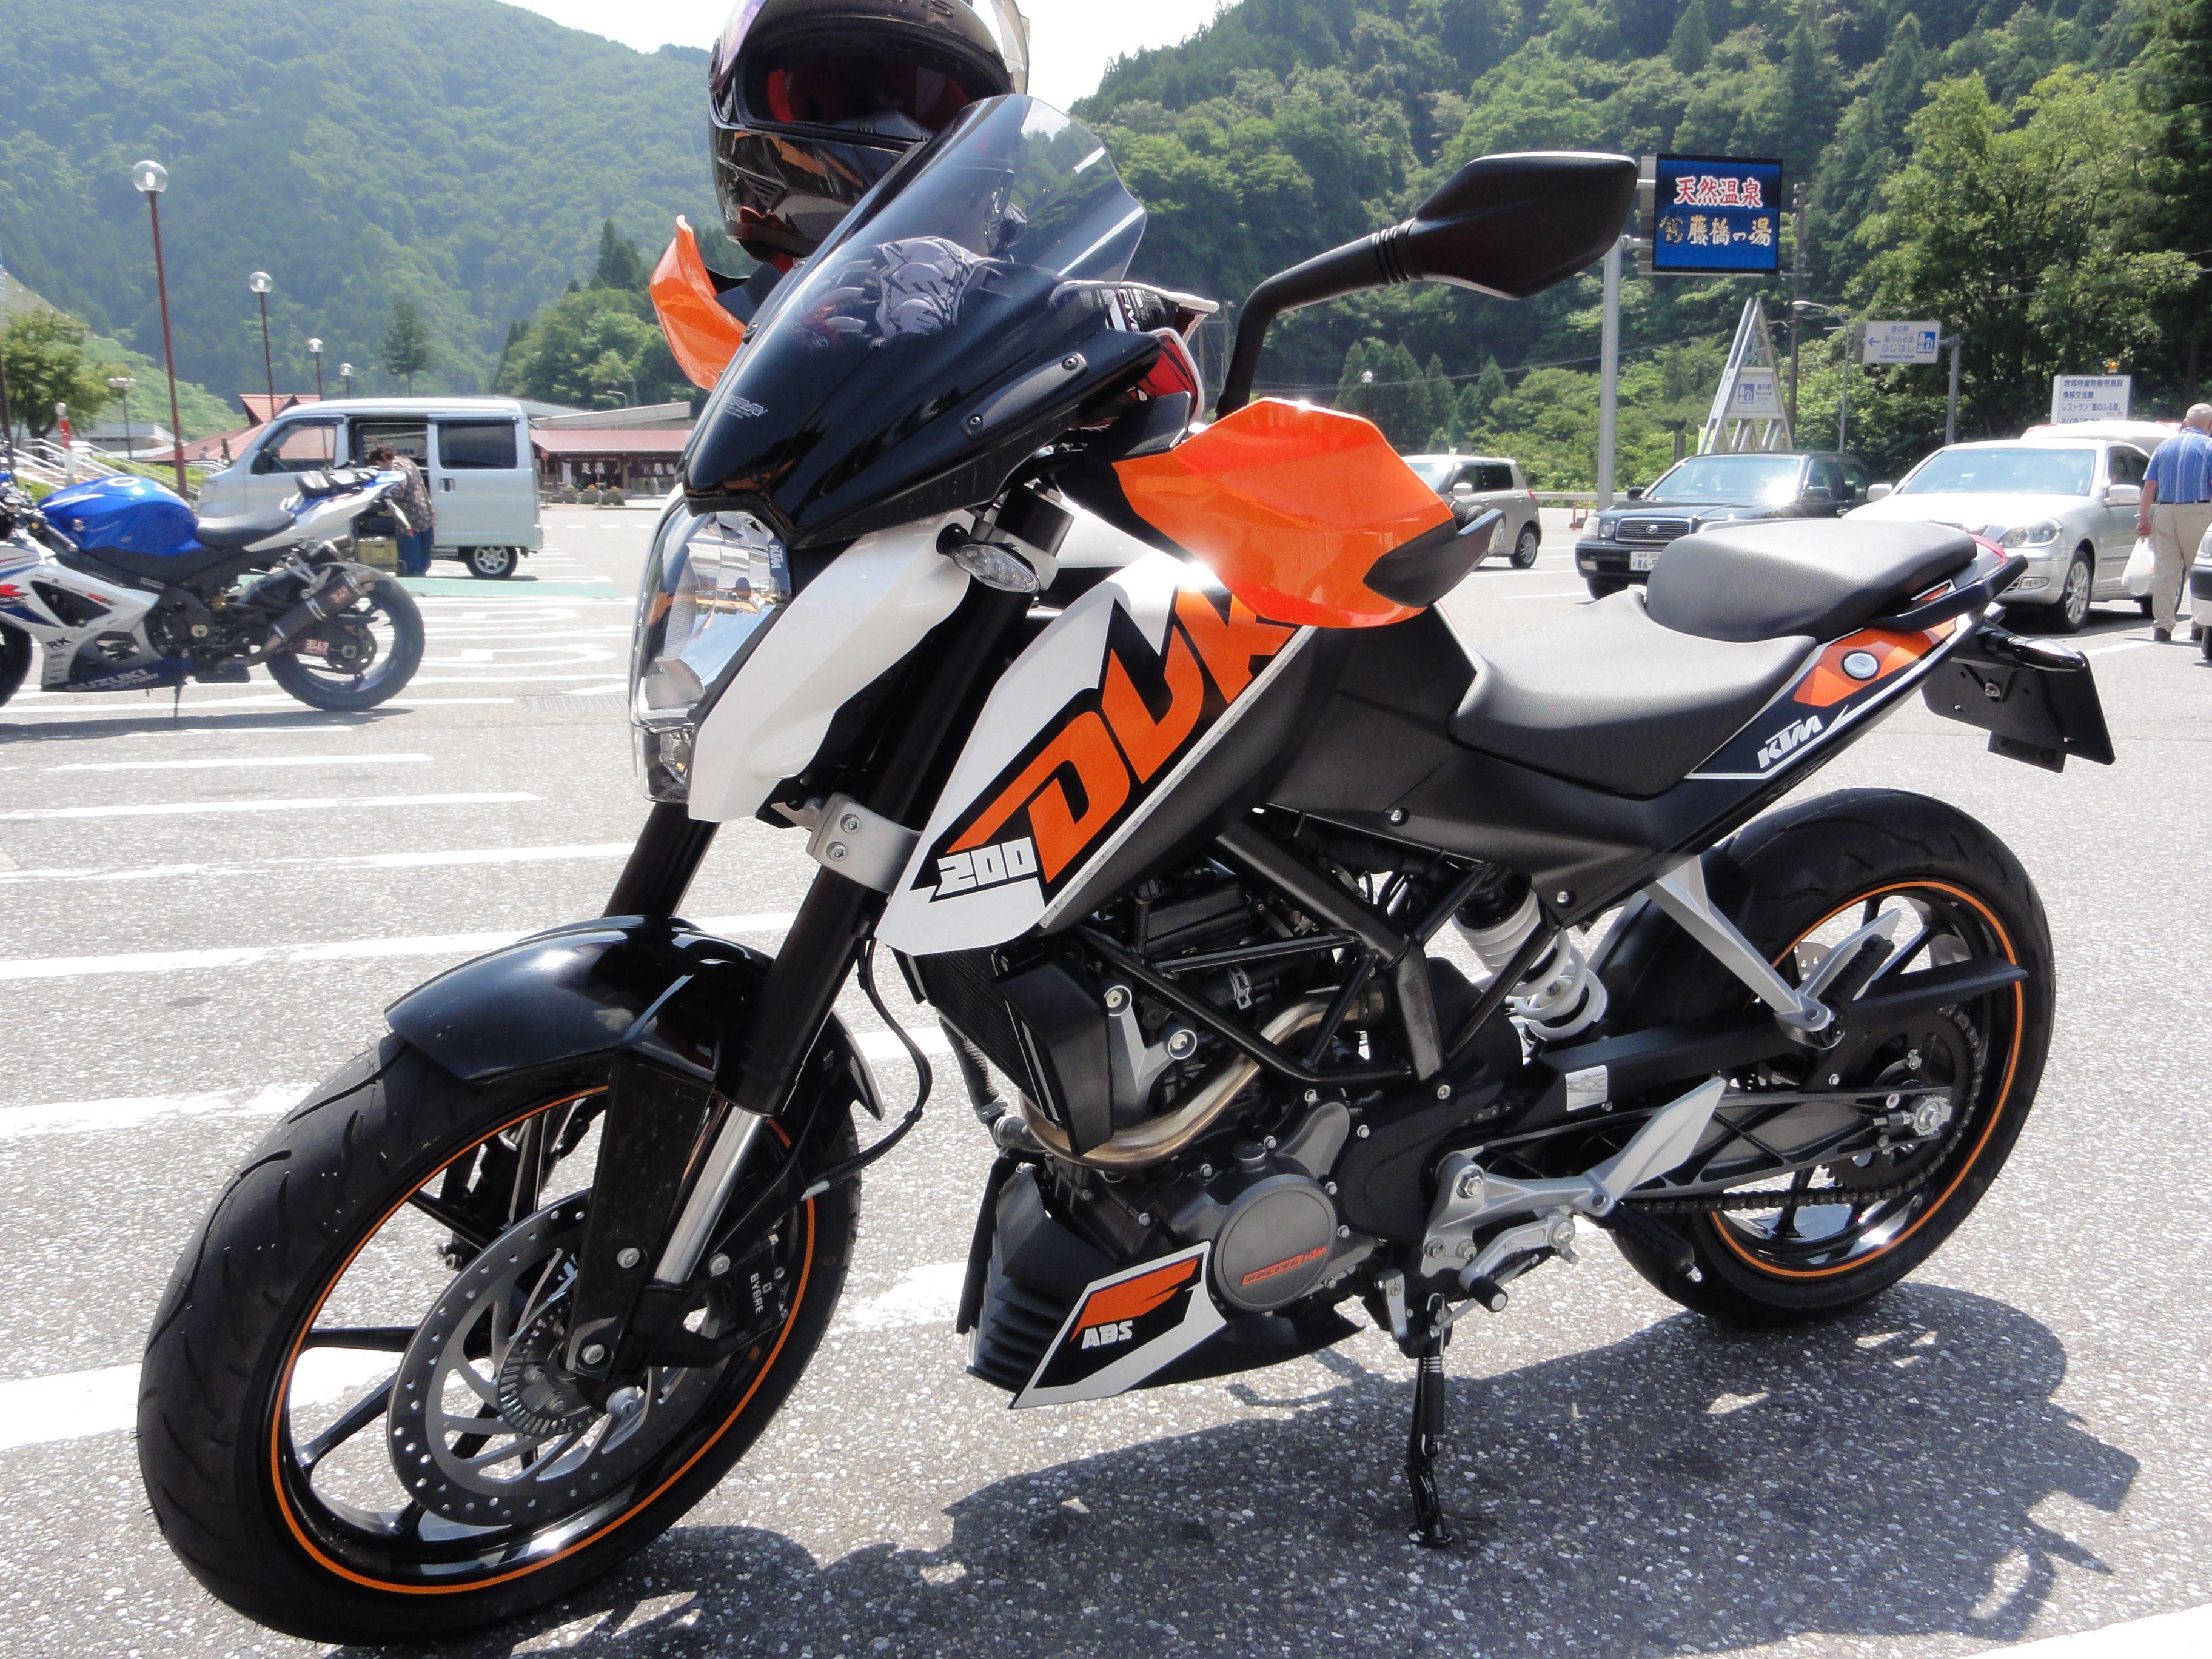 Motorcycle: KTM 200 DUKE Image and amazing Wallpapers